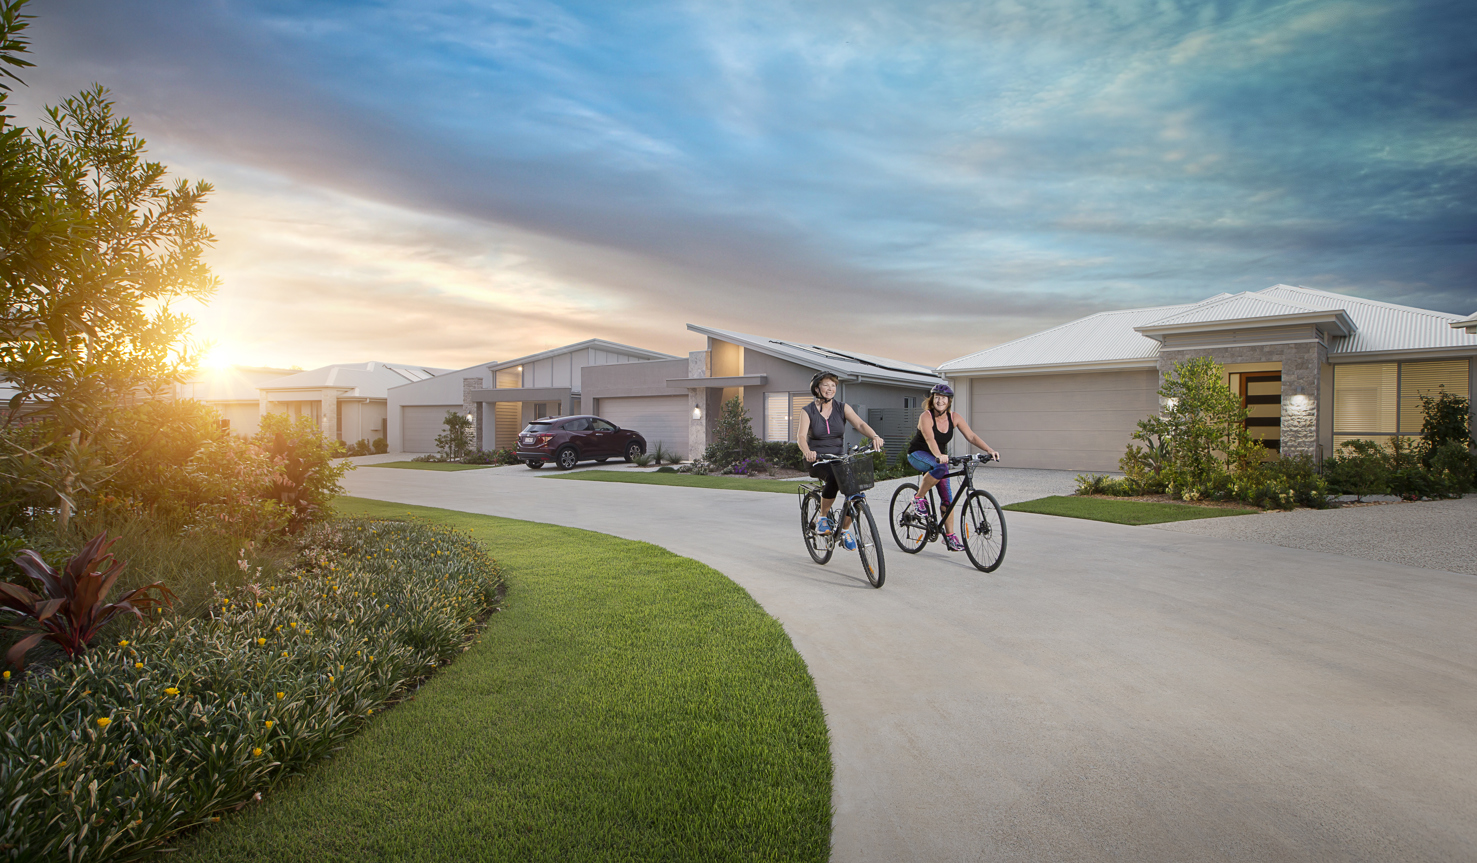 Homeowners riding their bike through the streets of Halcyon